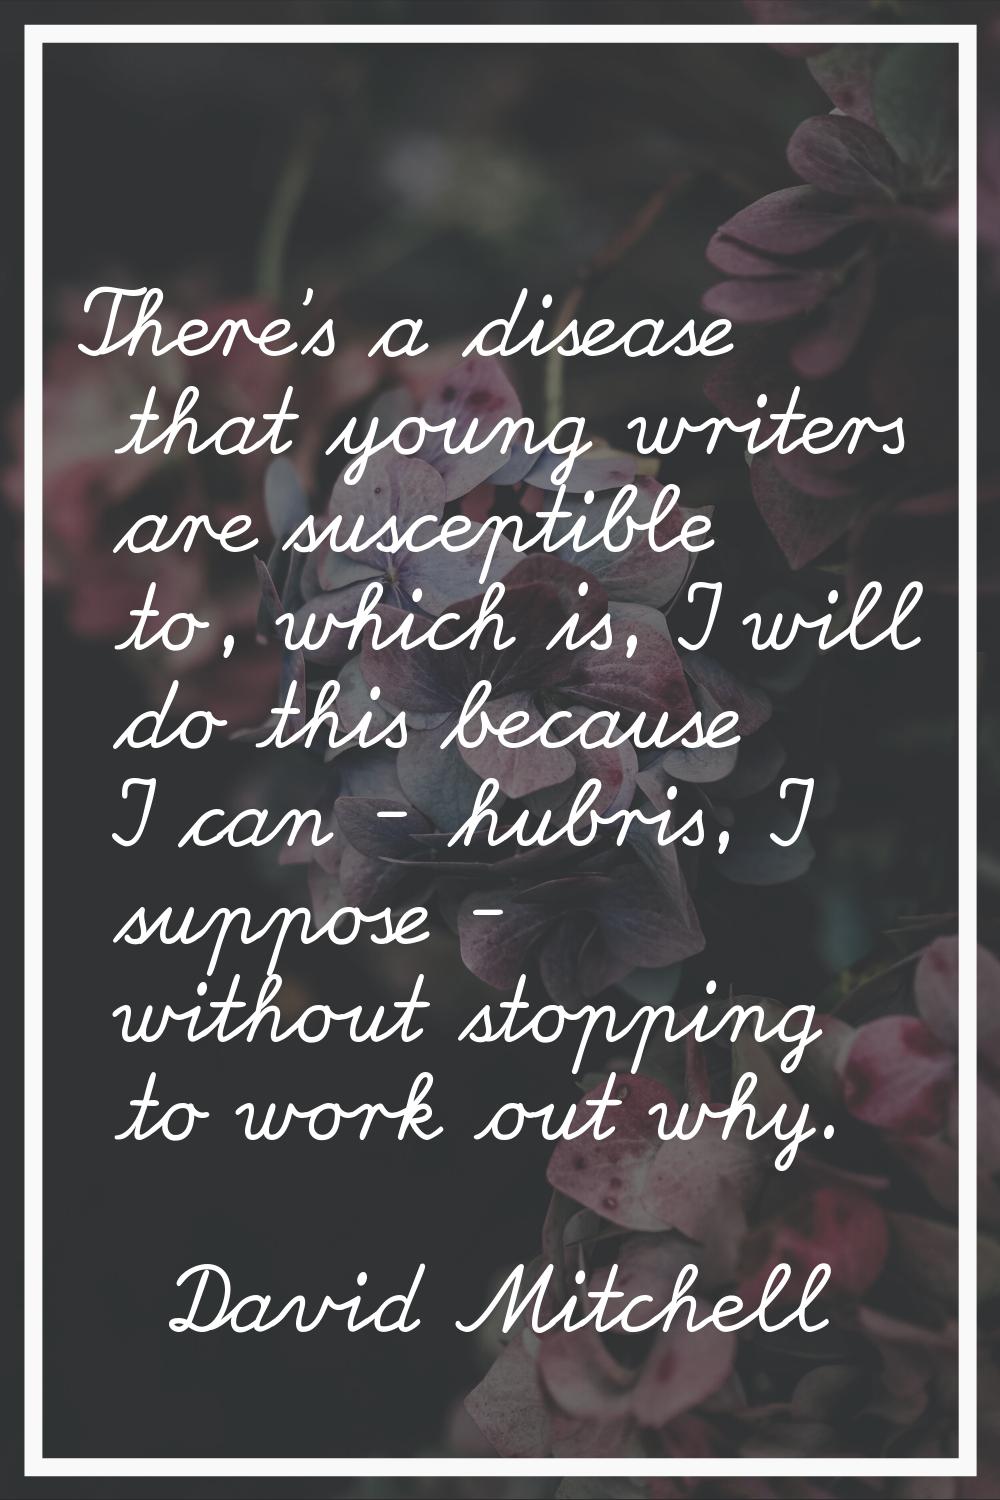 There's a disease that young writers are susceptible to, which is, I will do this because I can - h